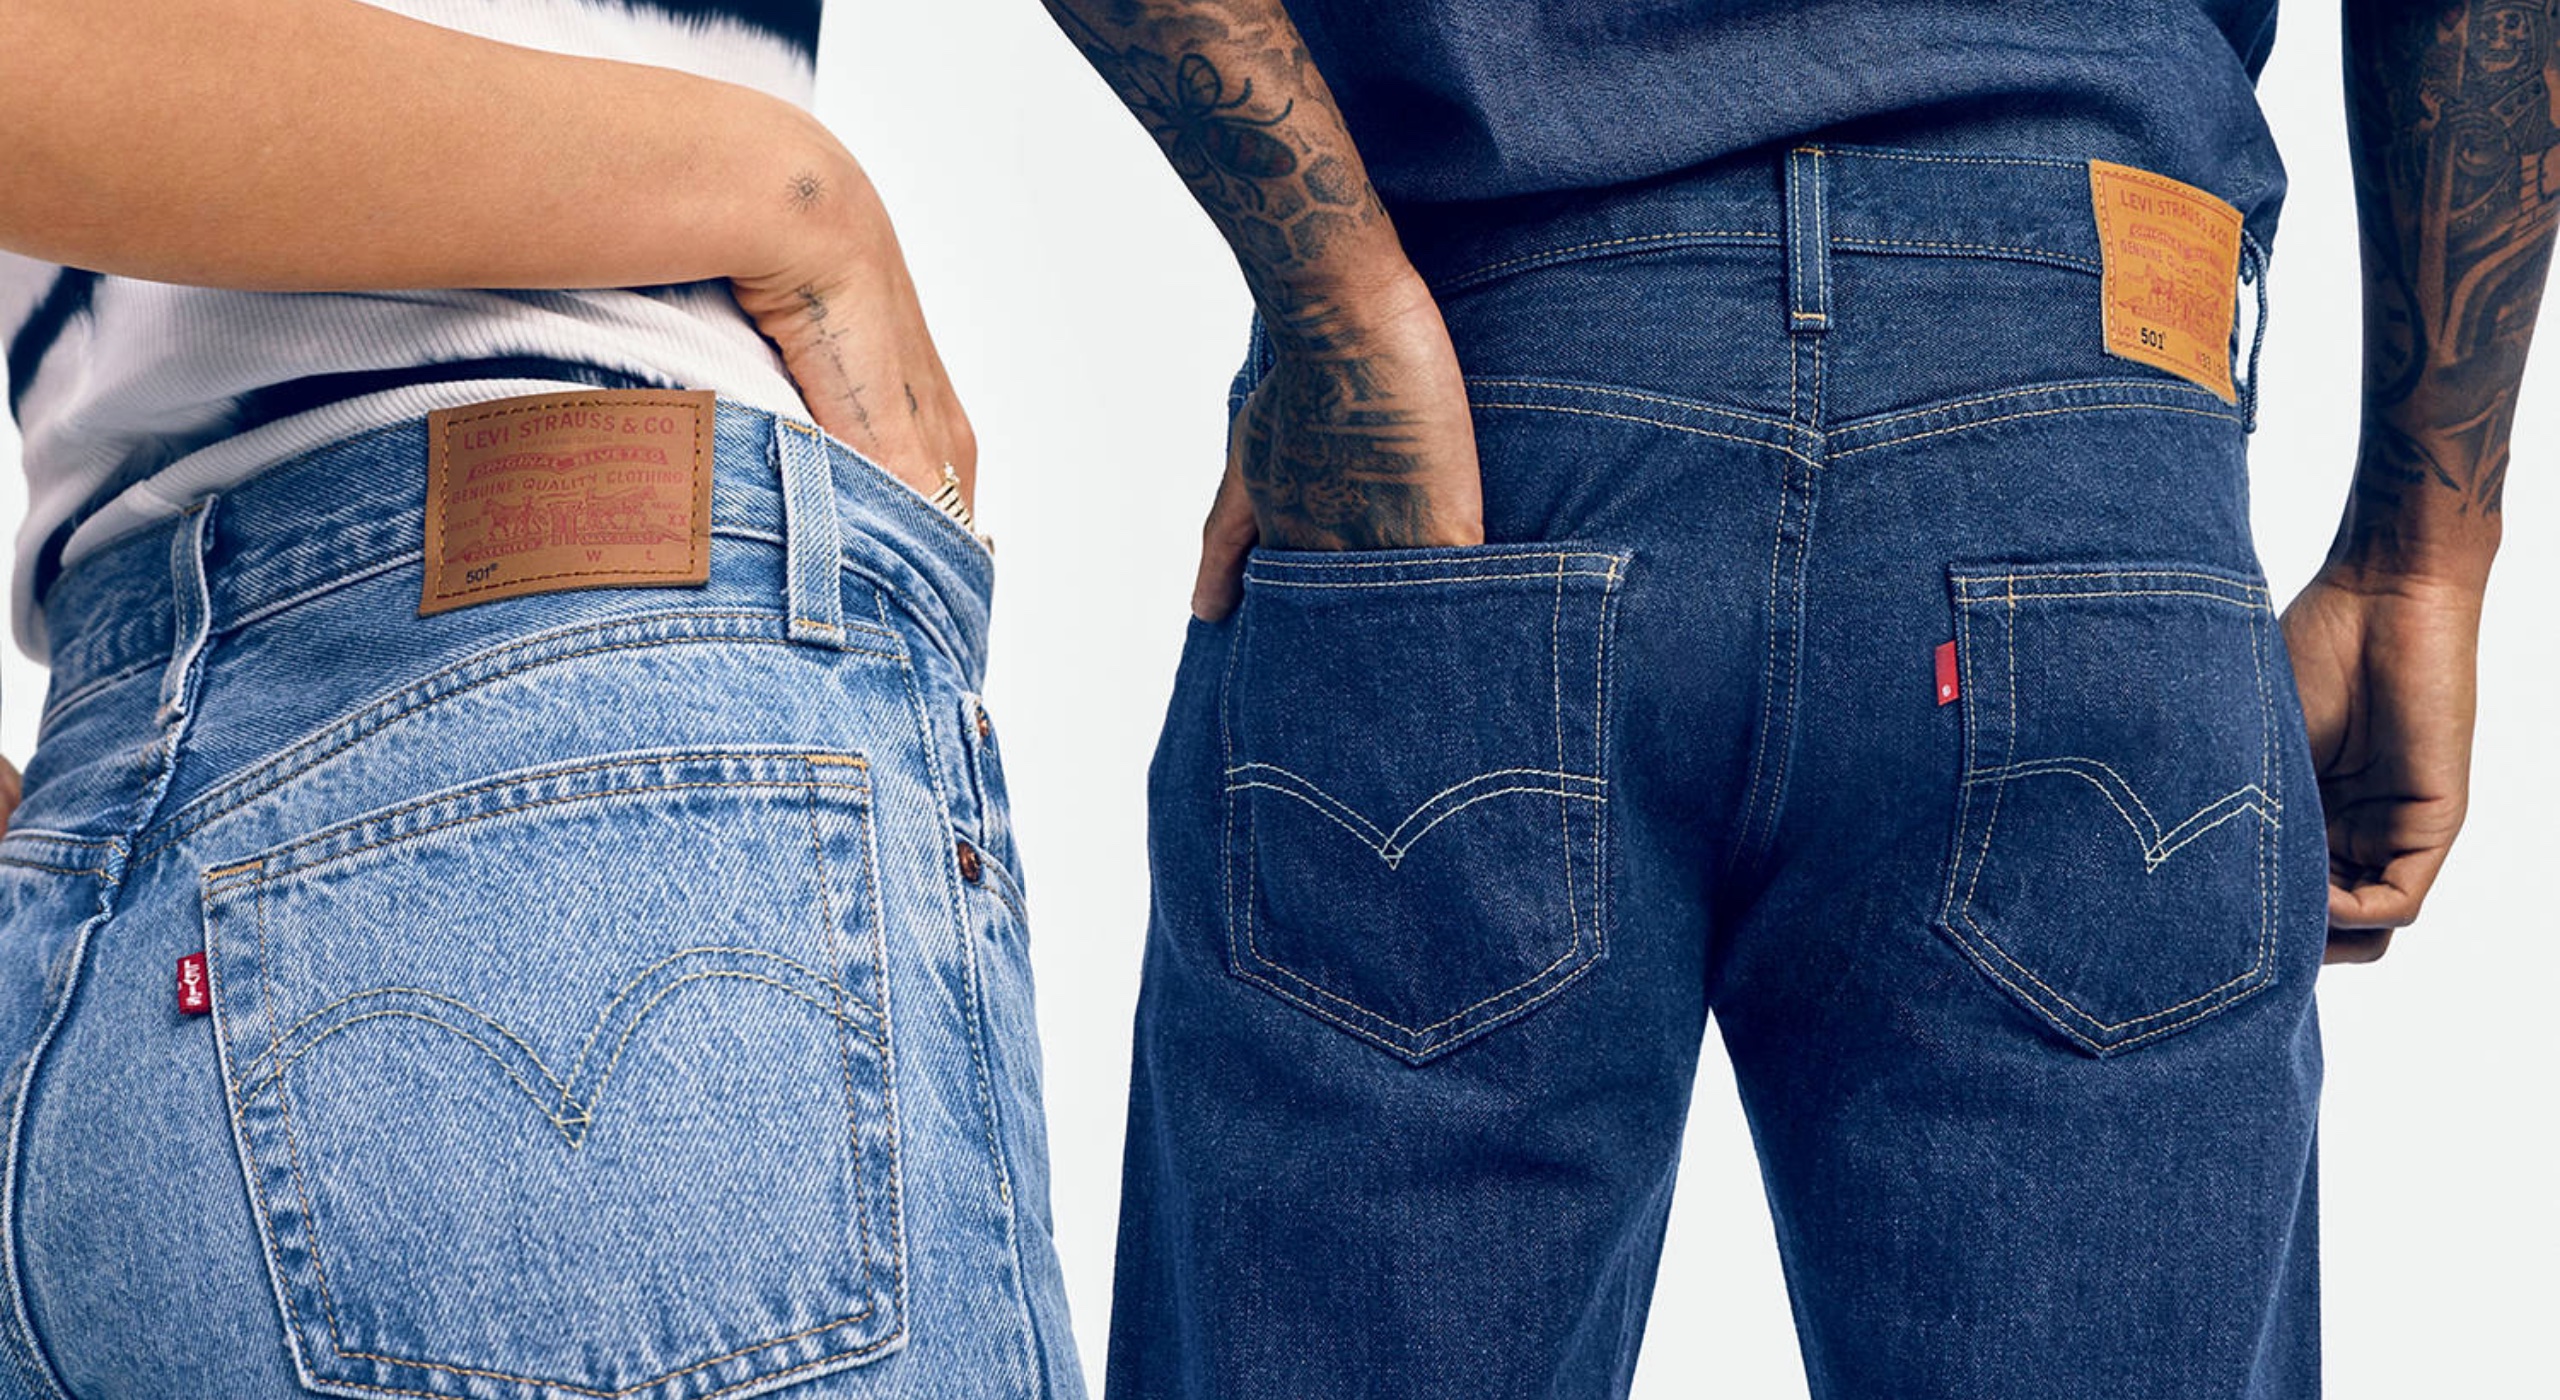 bestrating Raak verstrikt pond Levi's Early Access Black Friday deals are live with 40% off denim, more + free  shipping